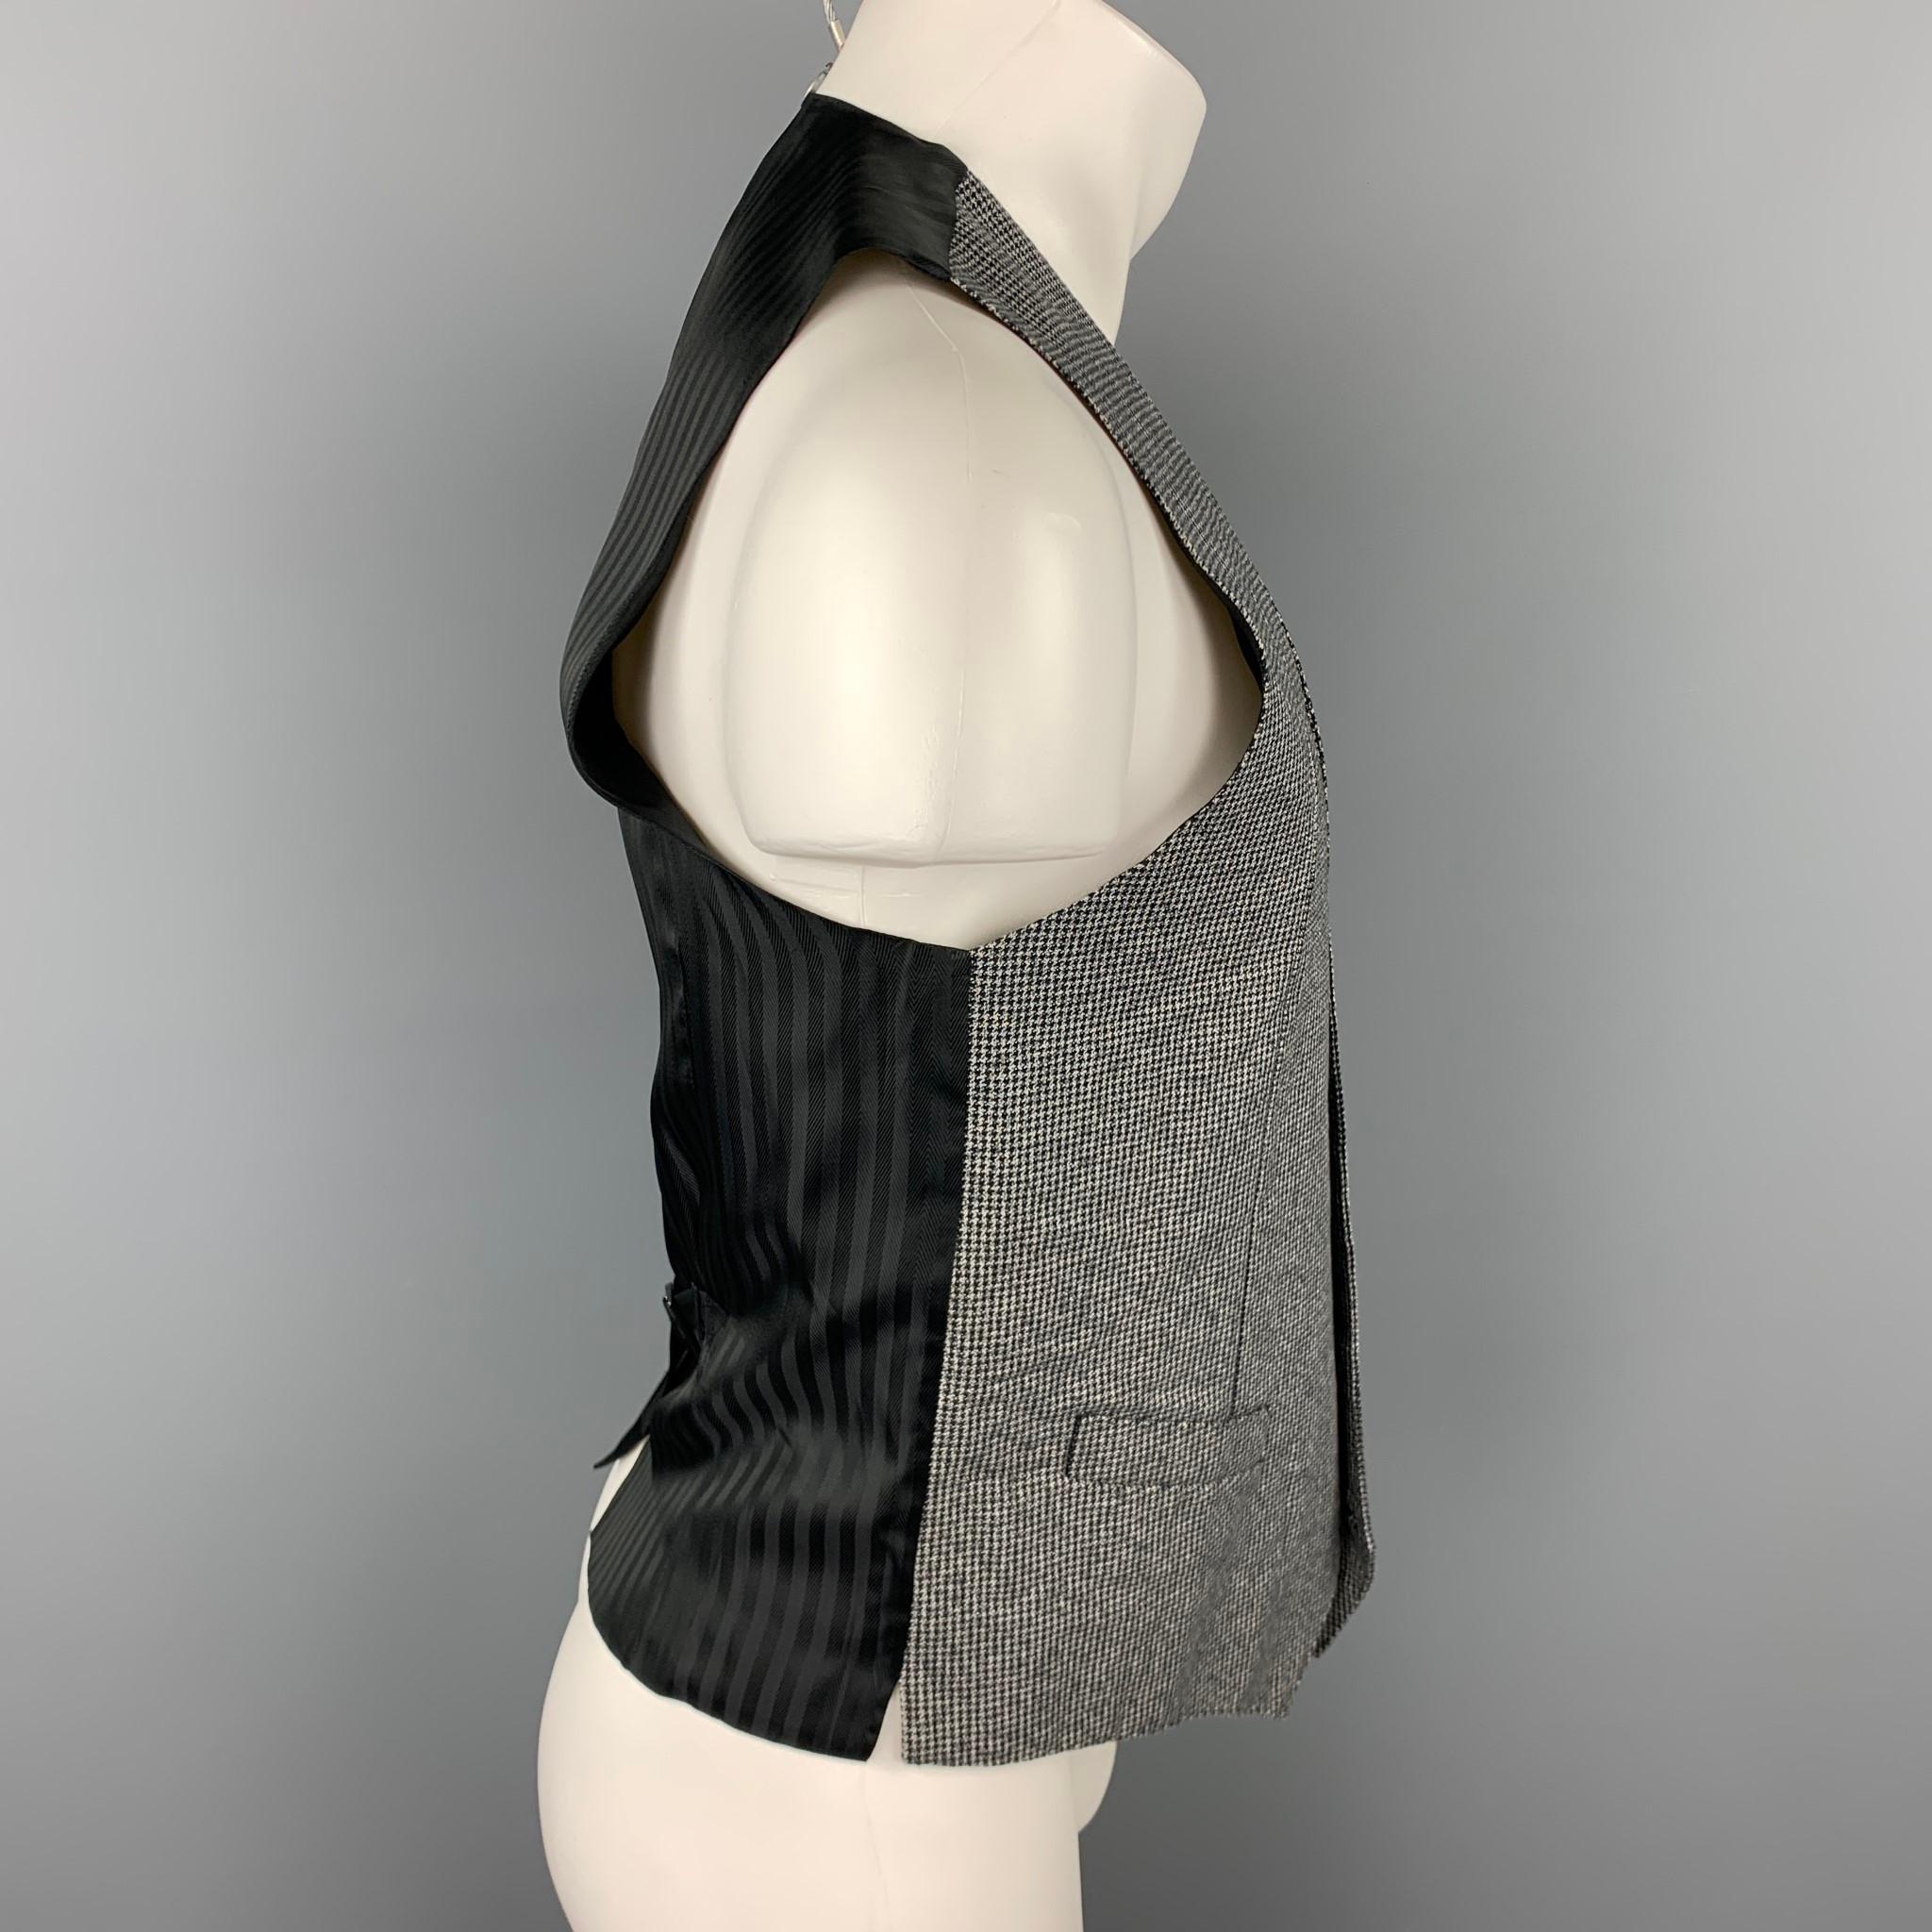 DOLCE & GABBANA dress vest comes in a grey & black houndstooth cotton featuring a back belt, slit pockets, and a buttoned closure. Made in Italy.

Excellent Pre-Owned Condition.
Marked: IT 48

Measurements:

Shoulder: 13.5 in. 
Chest: 38 in.